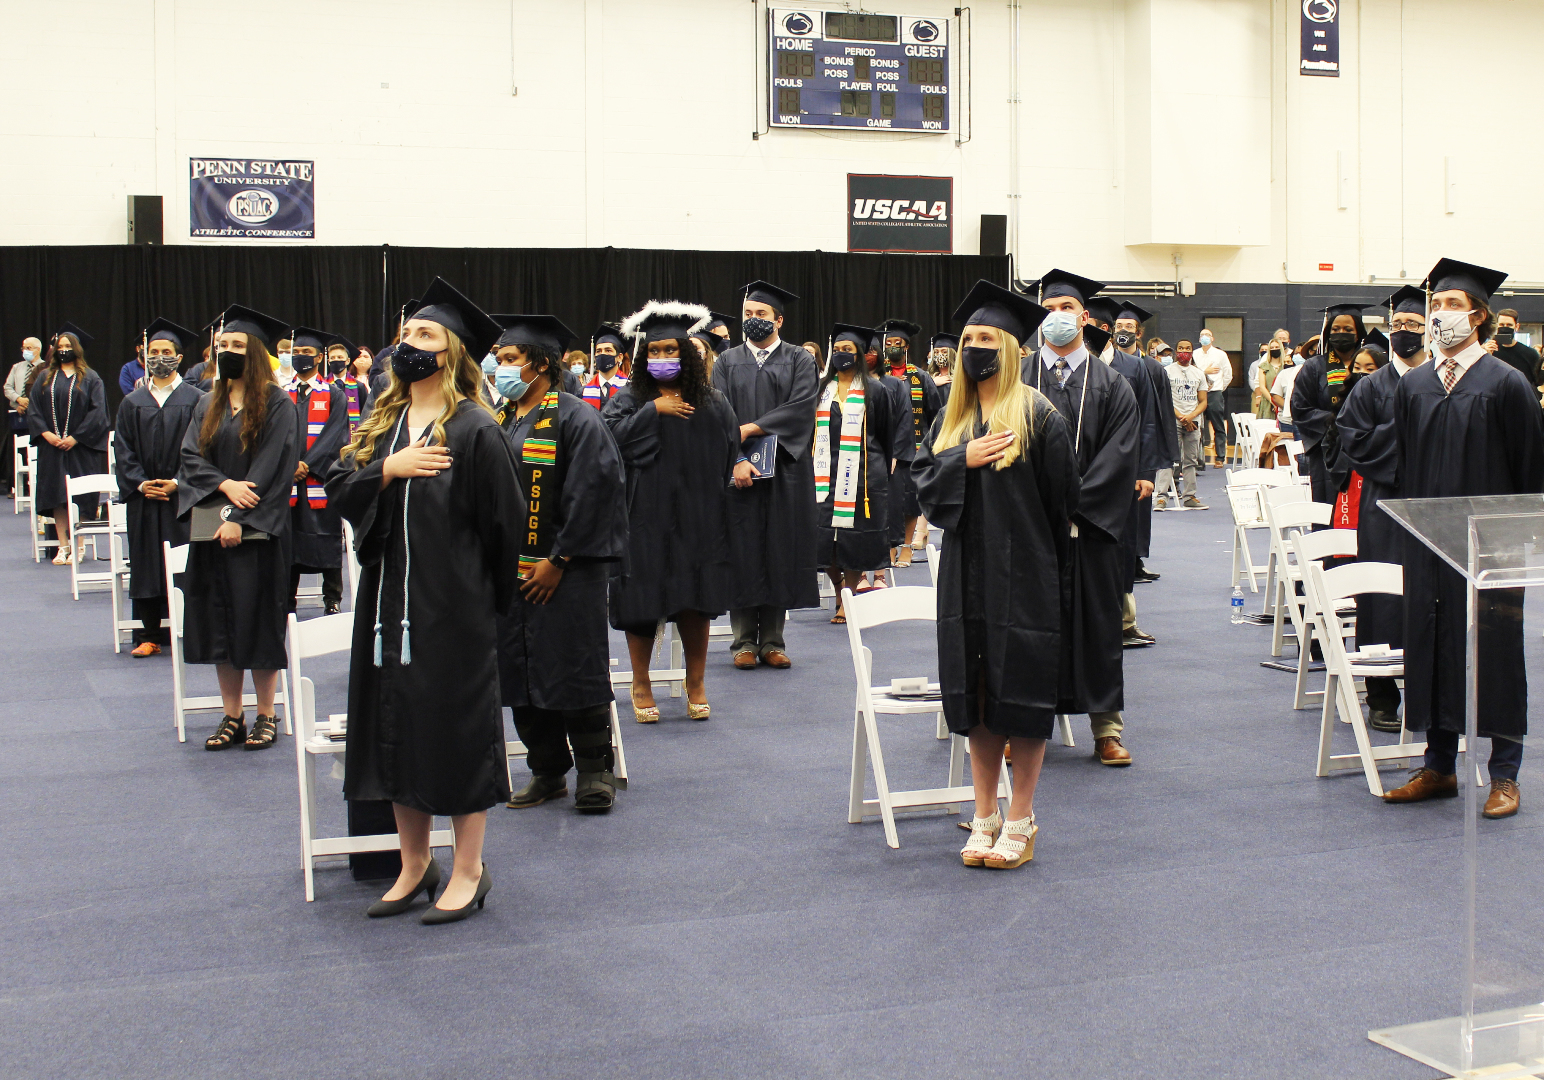 Penn State commencements held on campuses throughout Pennsylvania